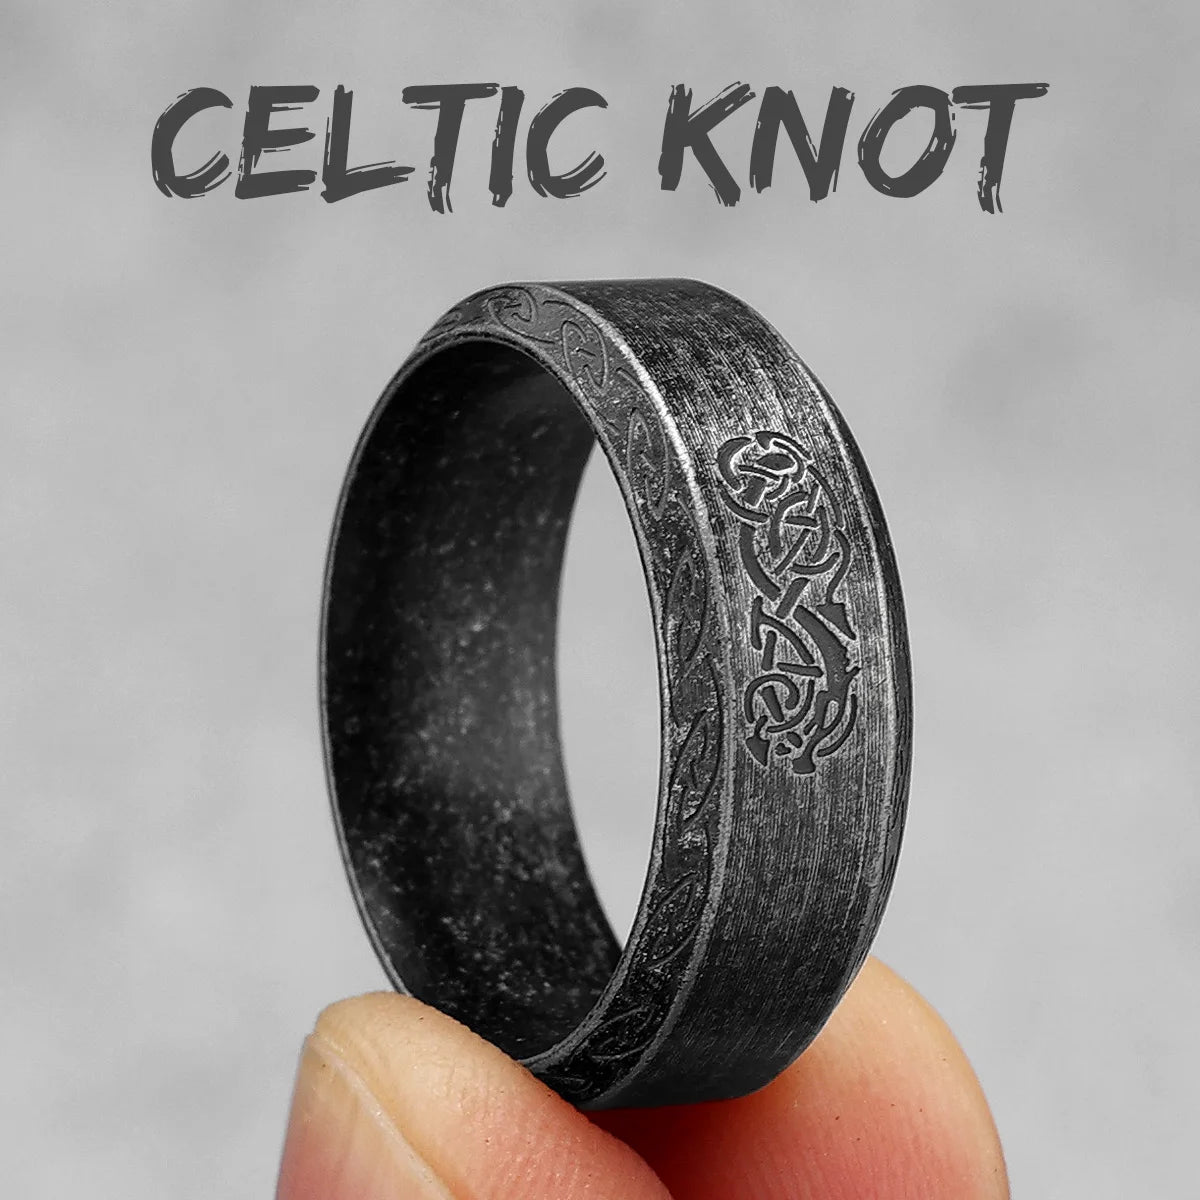 Vintage Edition - Viking Runes Celtic Knot Rings - Mythical Pieces 11 / R1009-Vintage Black